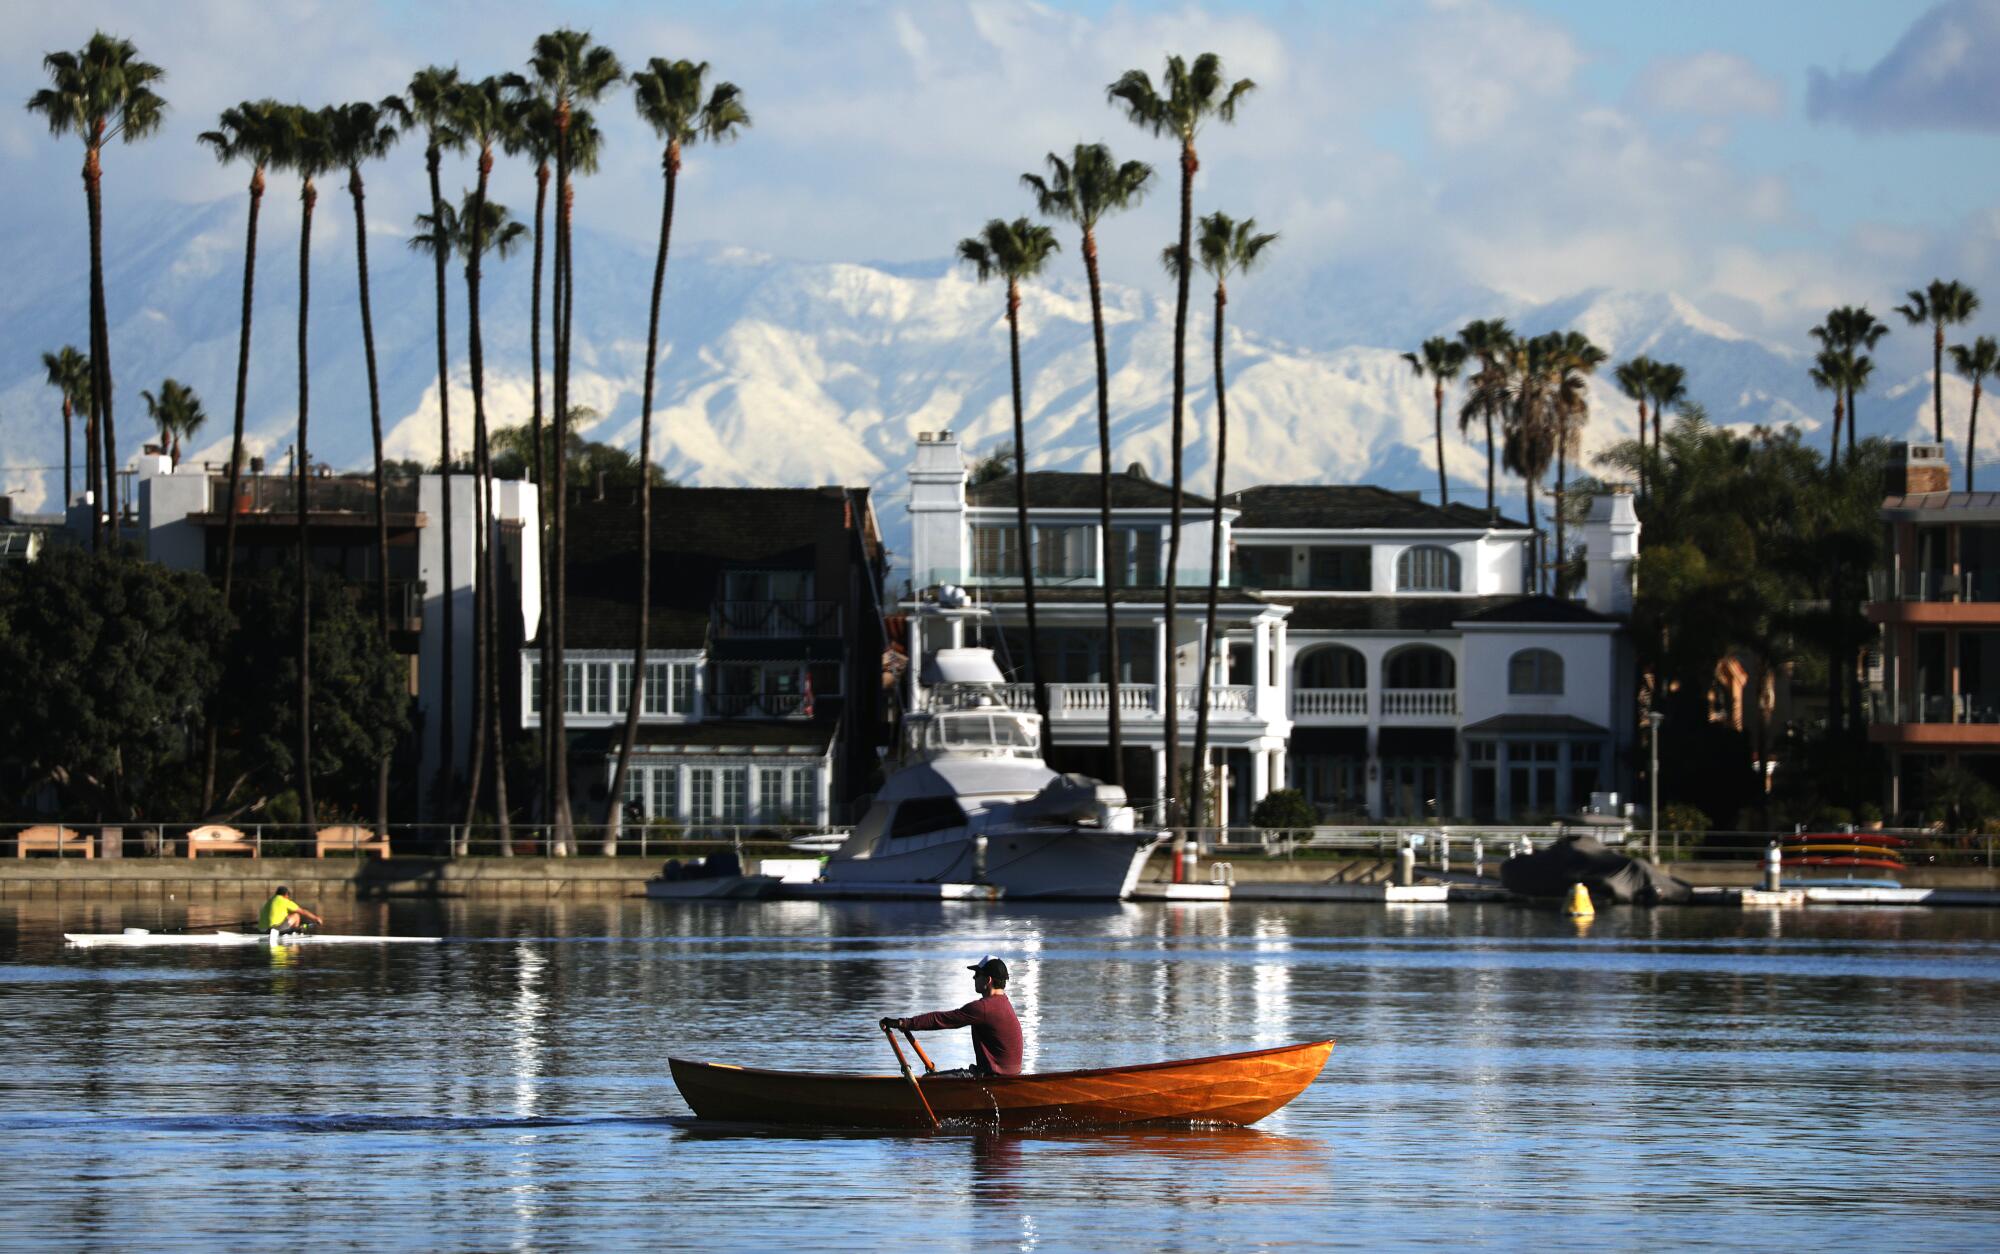 Snow-covered mountains are seen from the Peninsula in Long Beach, where a man rows a boat on the water in front of buildings.